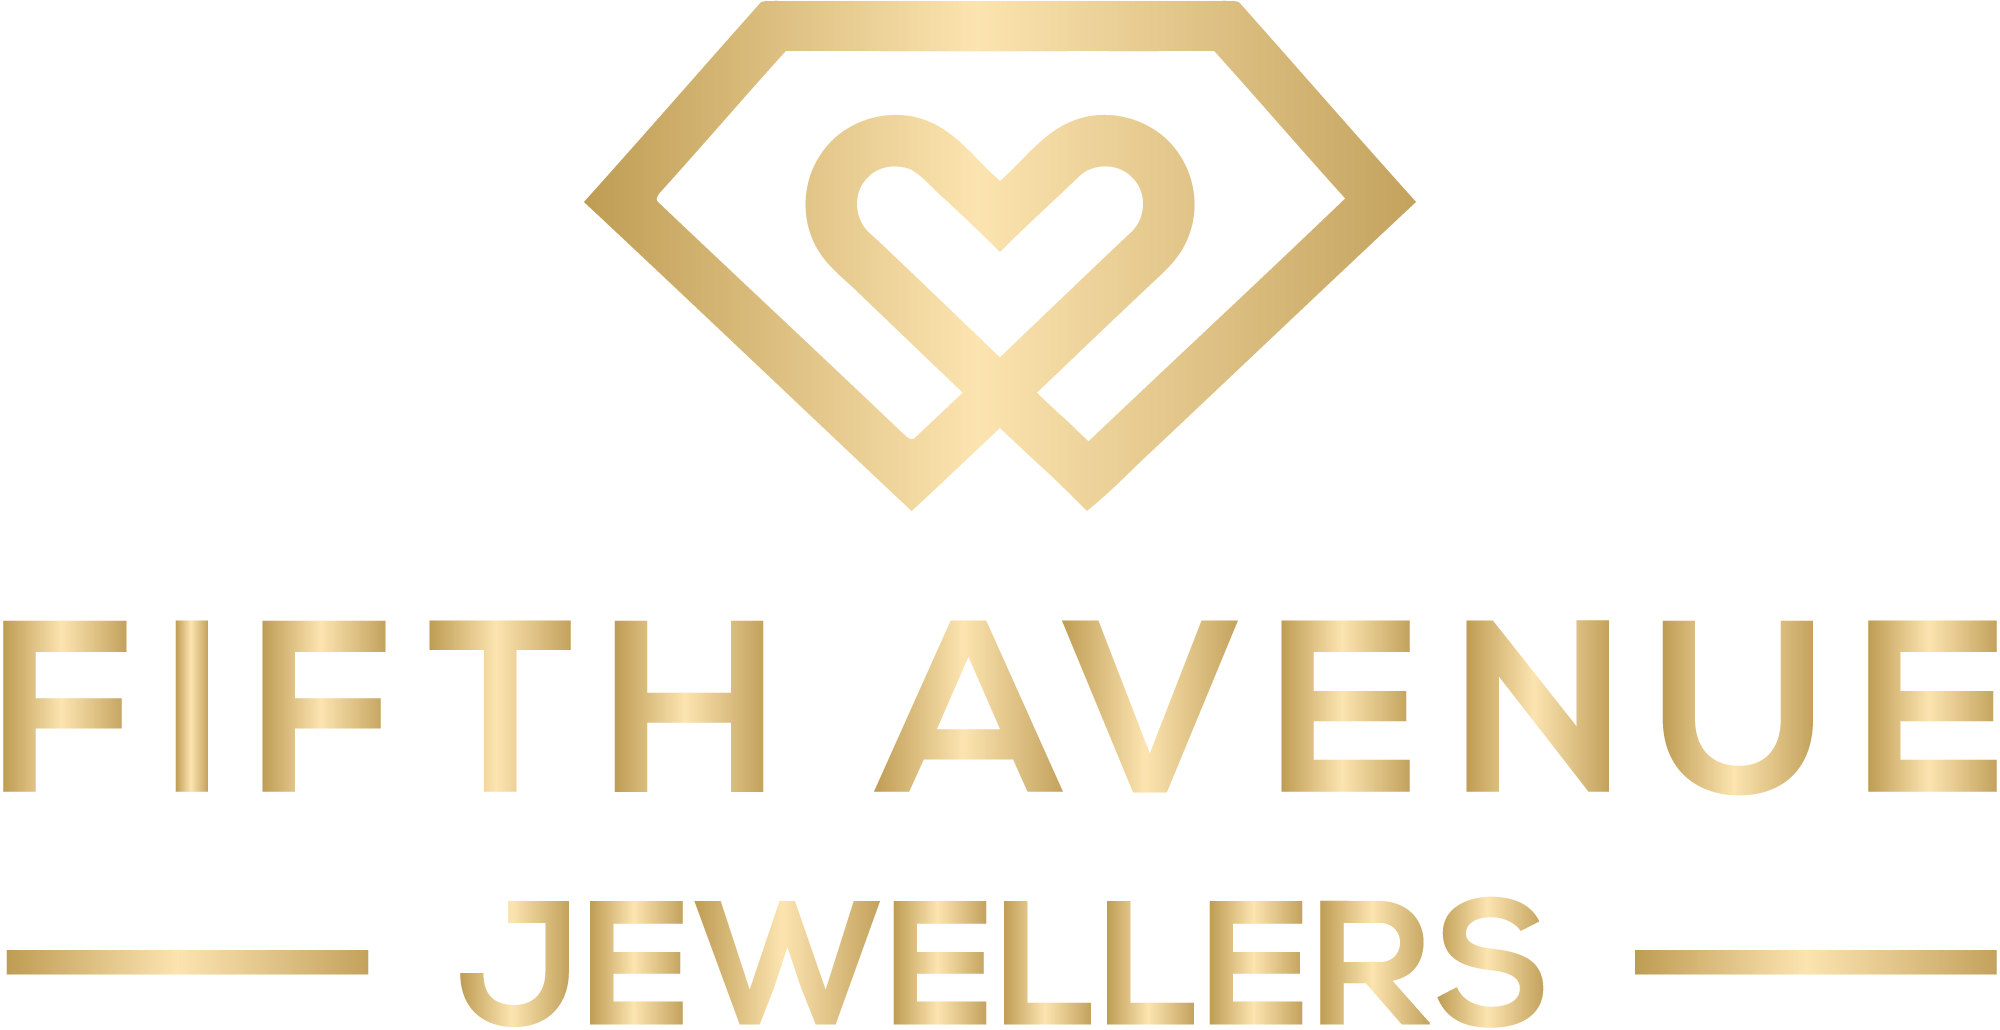 Gold Nuggets - 5th Avenue Jewelers